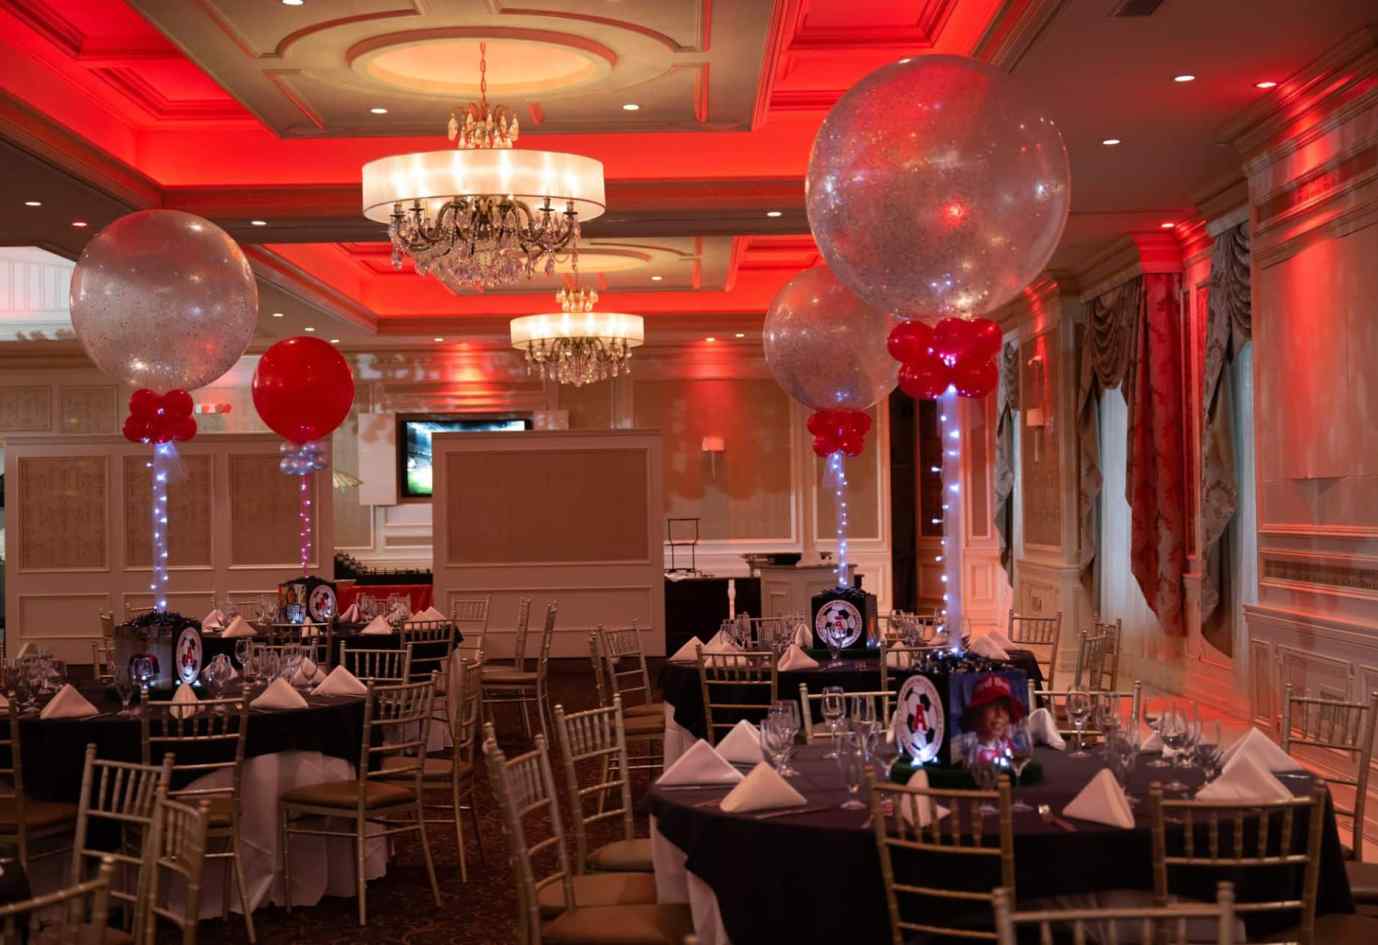 Ceiling Décor Gallery · Party & Event Décor · Balloon Artistry